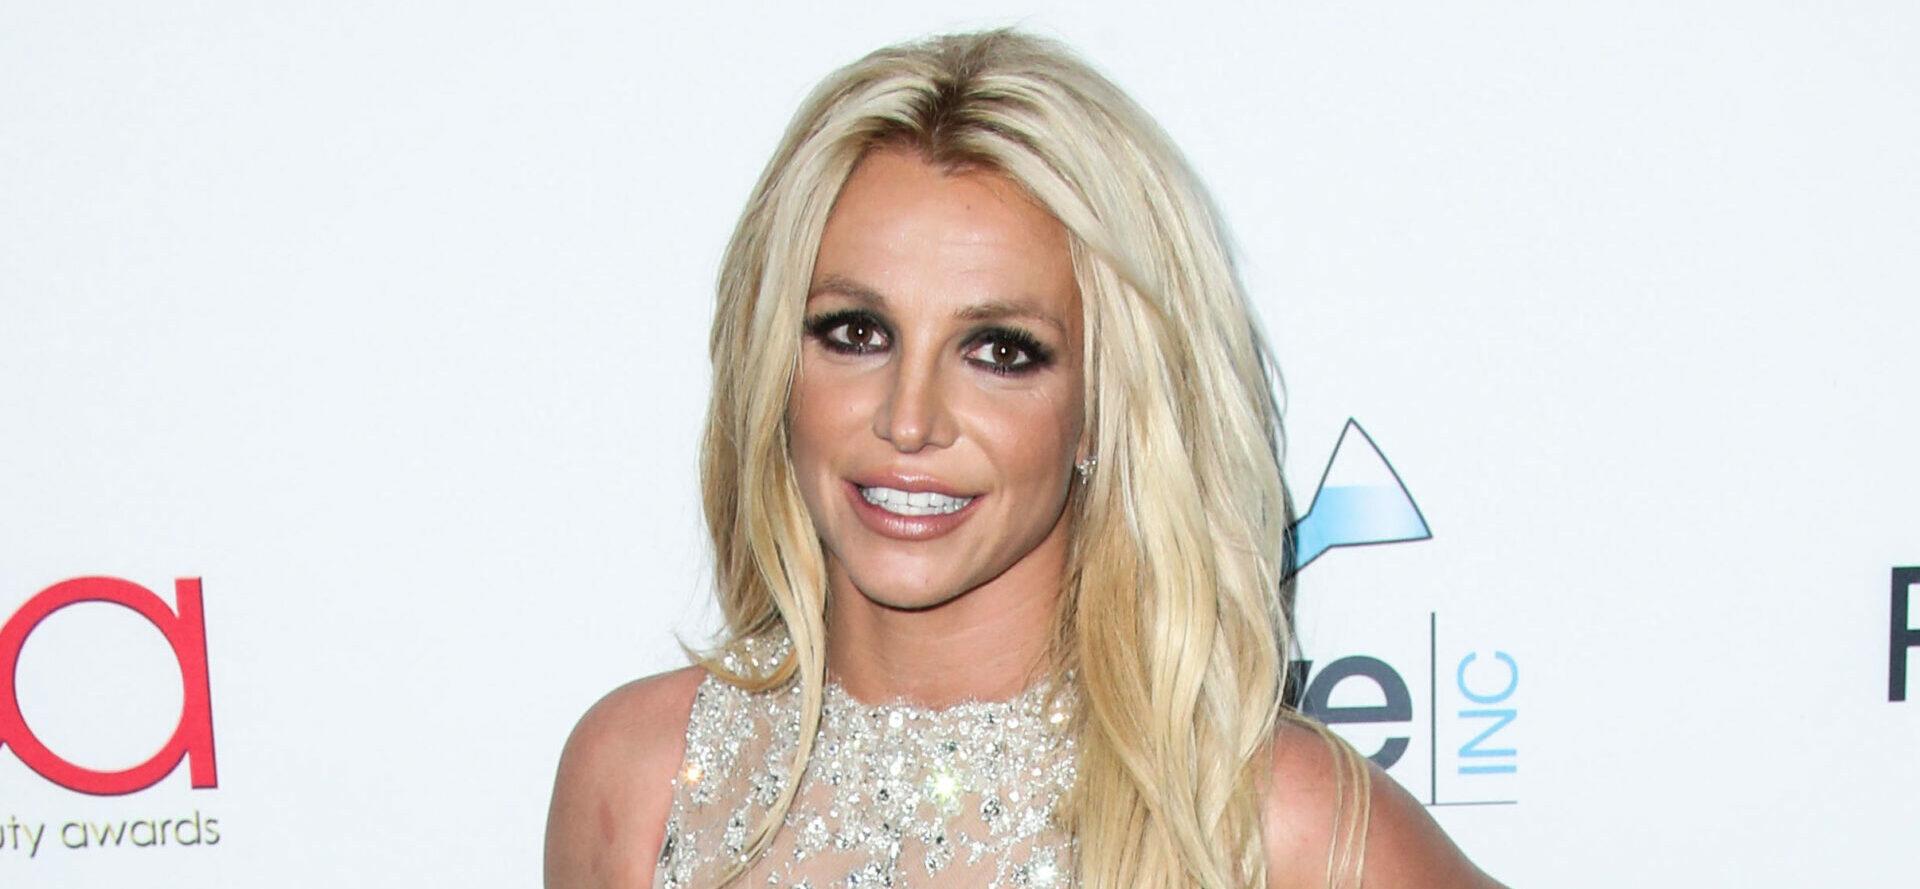 Britney Spears Opens Up On Her Weight, Shares Ex-Husband’s ‘Easy Tricks To Stay Healthy’